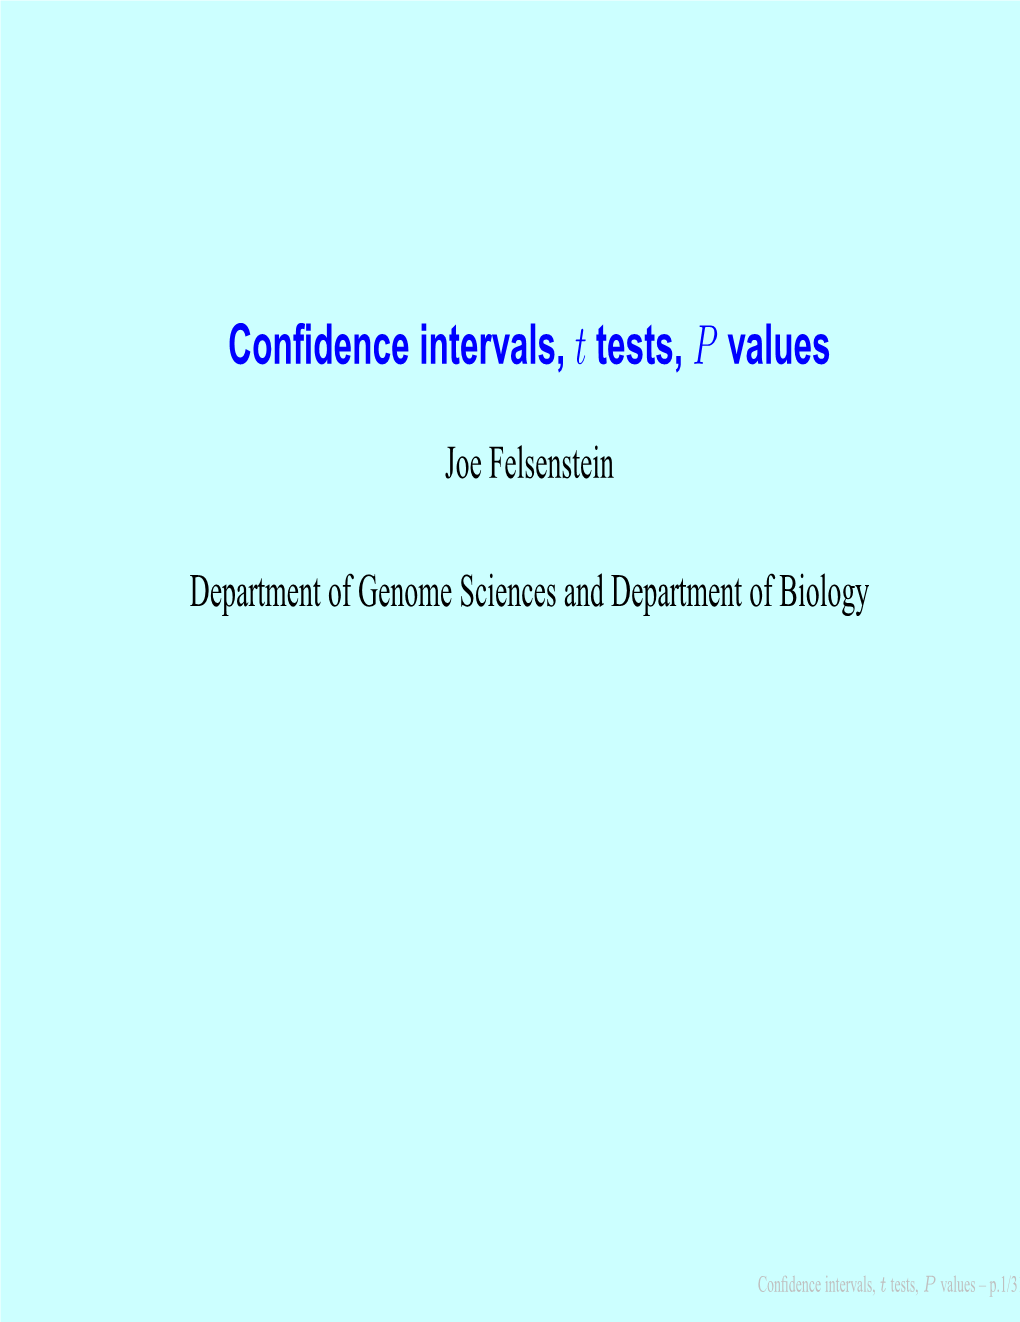 Confidence Intervals, T Tests, P Values